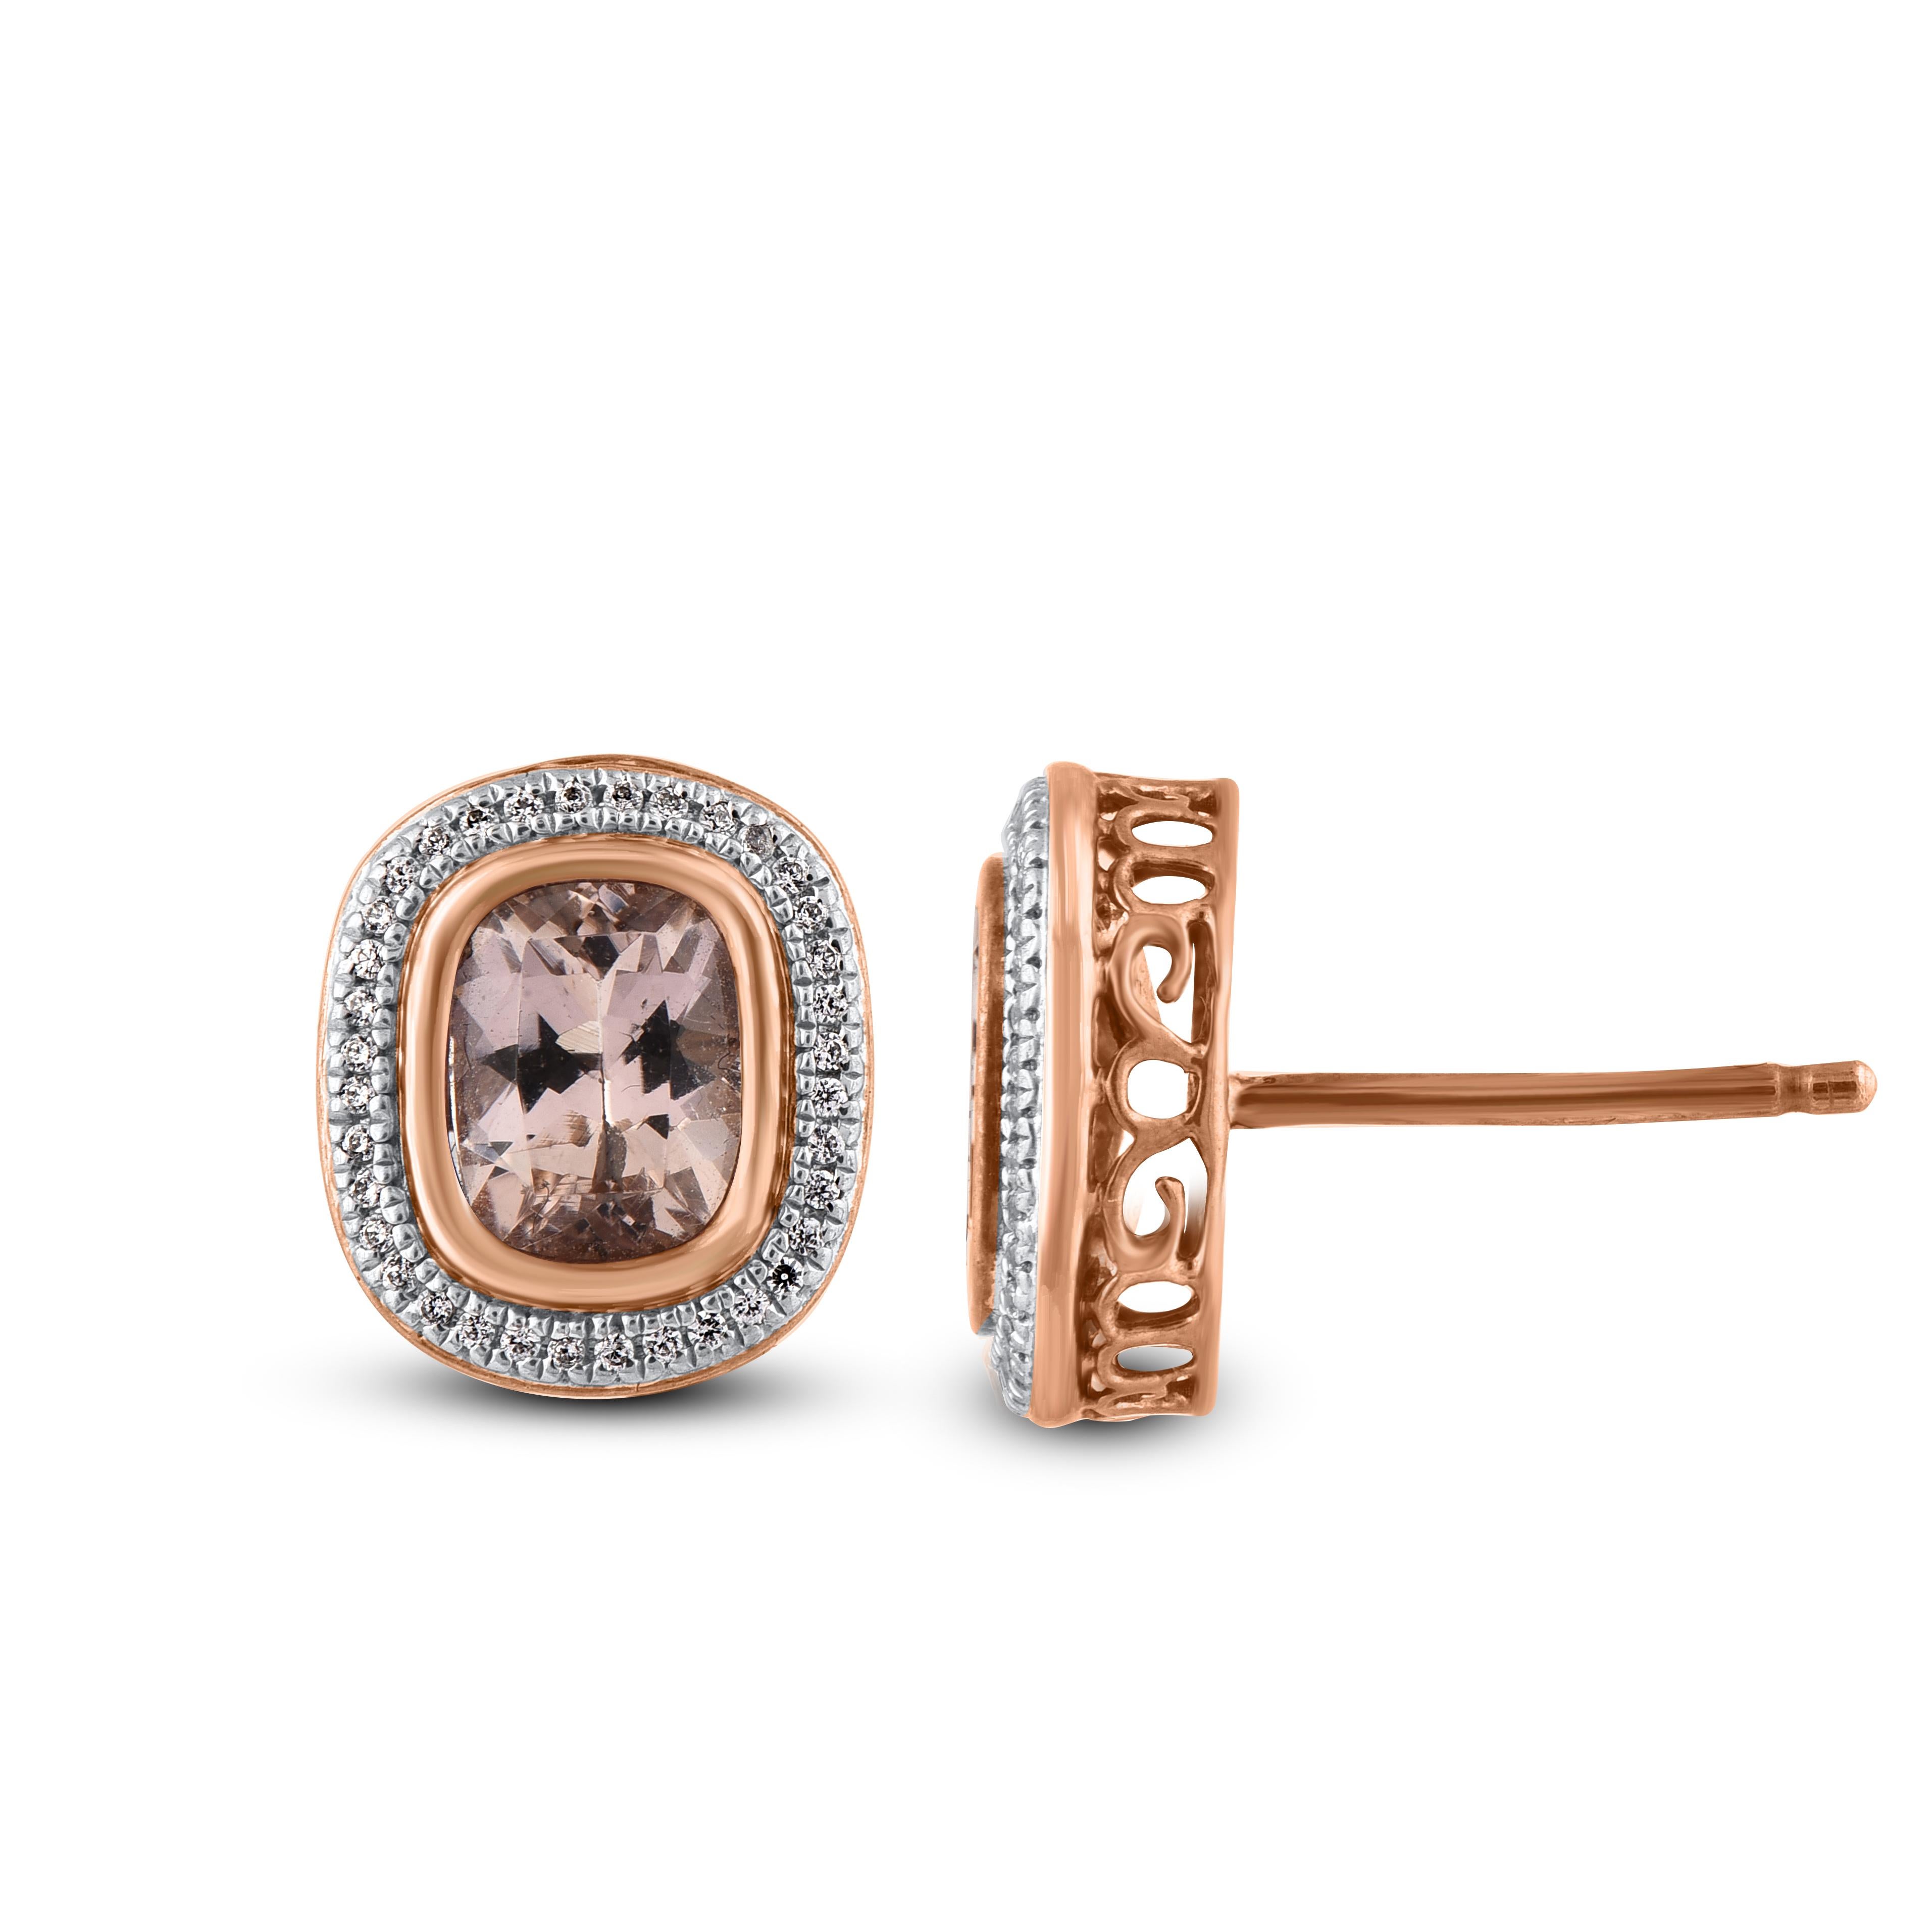 These morganite and diamond stud earrings are perfect for everyday wear. Handcrafted by our experts in 14 karat rose gold and studded with 72 round single cut and 2 cushion morganite in prong setting, glitters in H-I color, I2 clarity. Captivates in